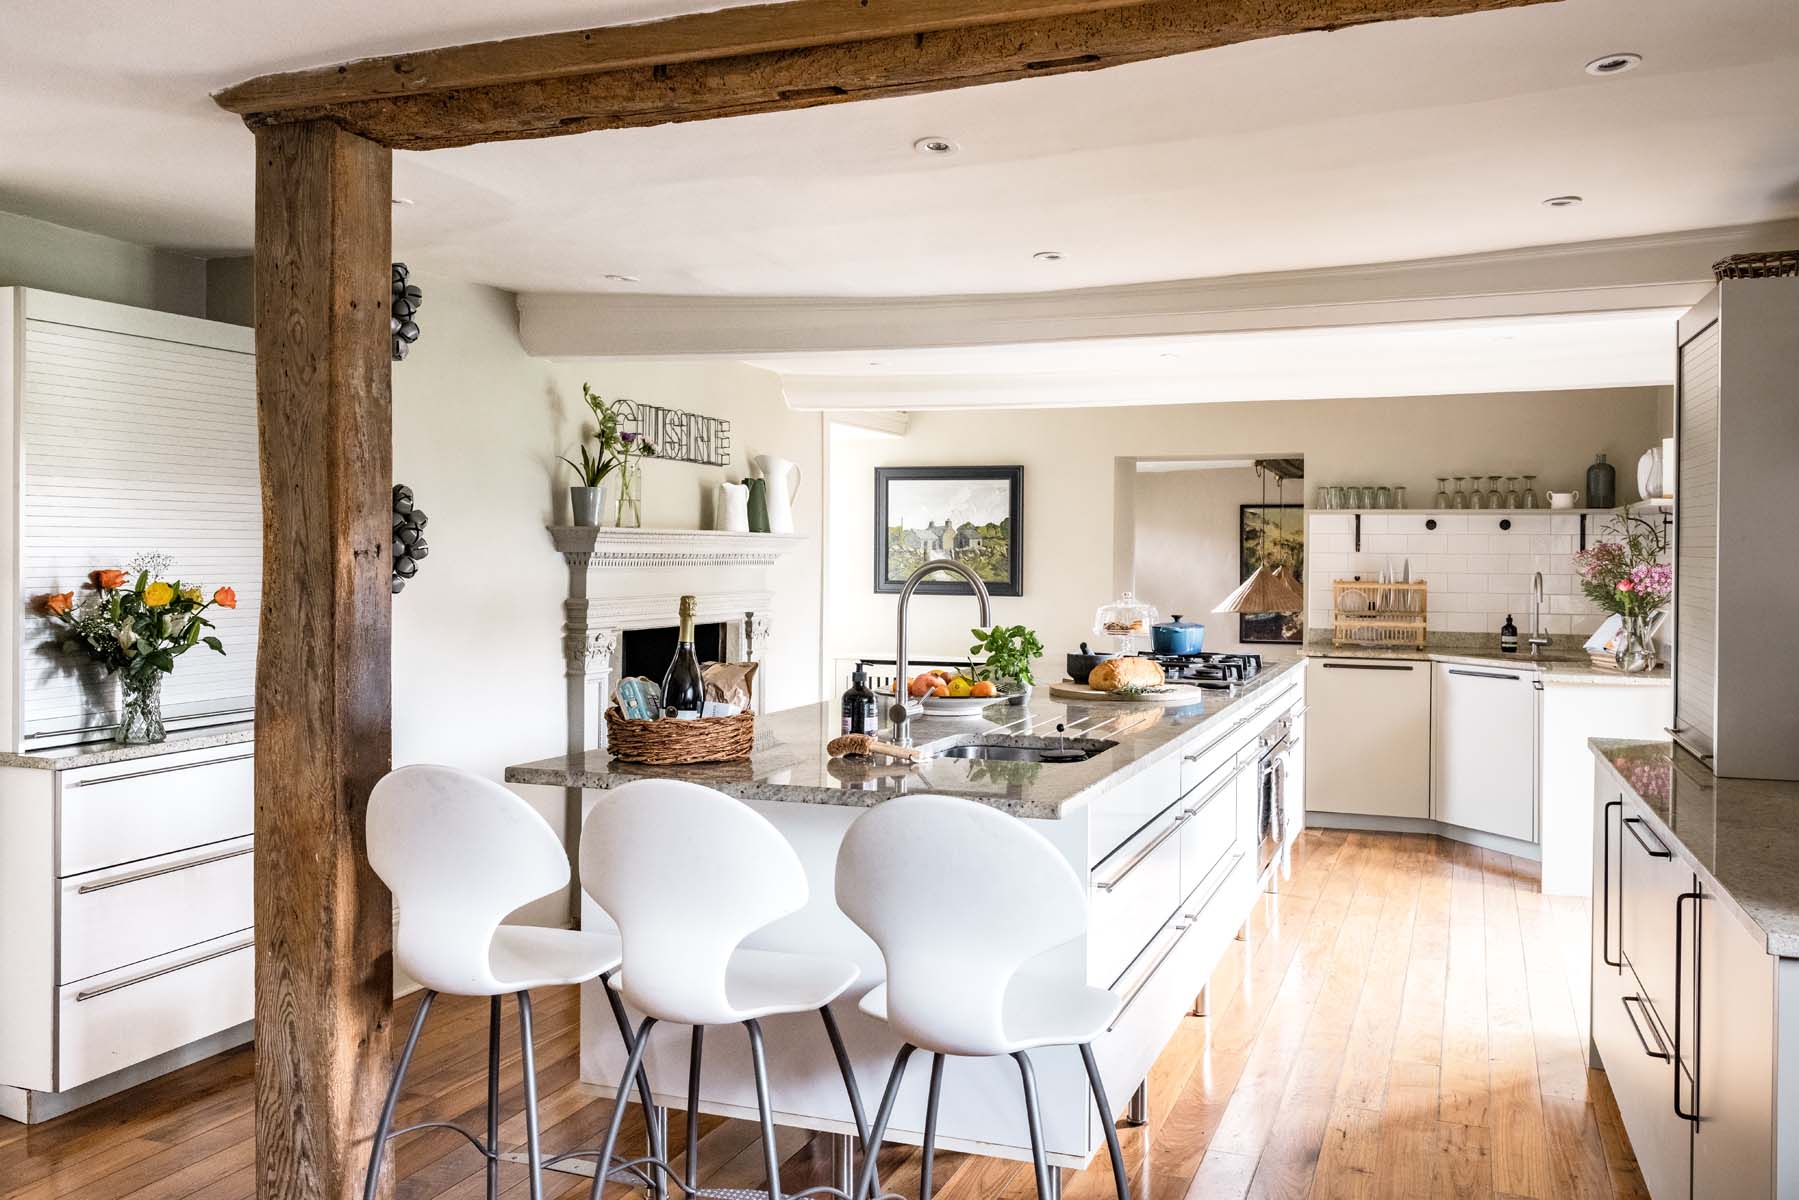 Large kitchen with oak beams, low ceiling and large island with marble top